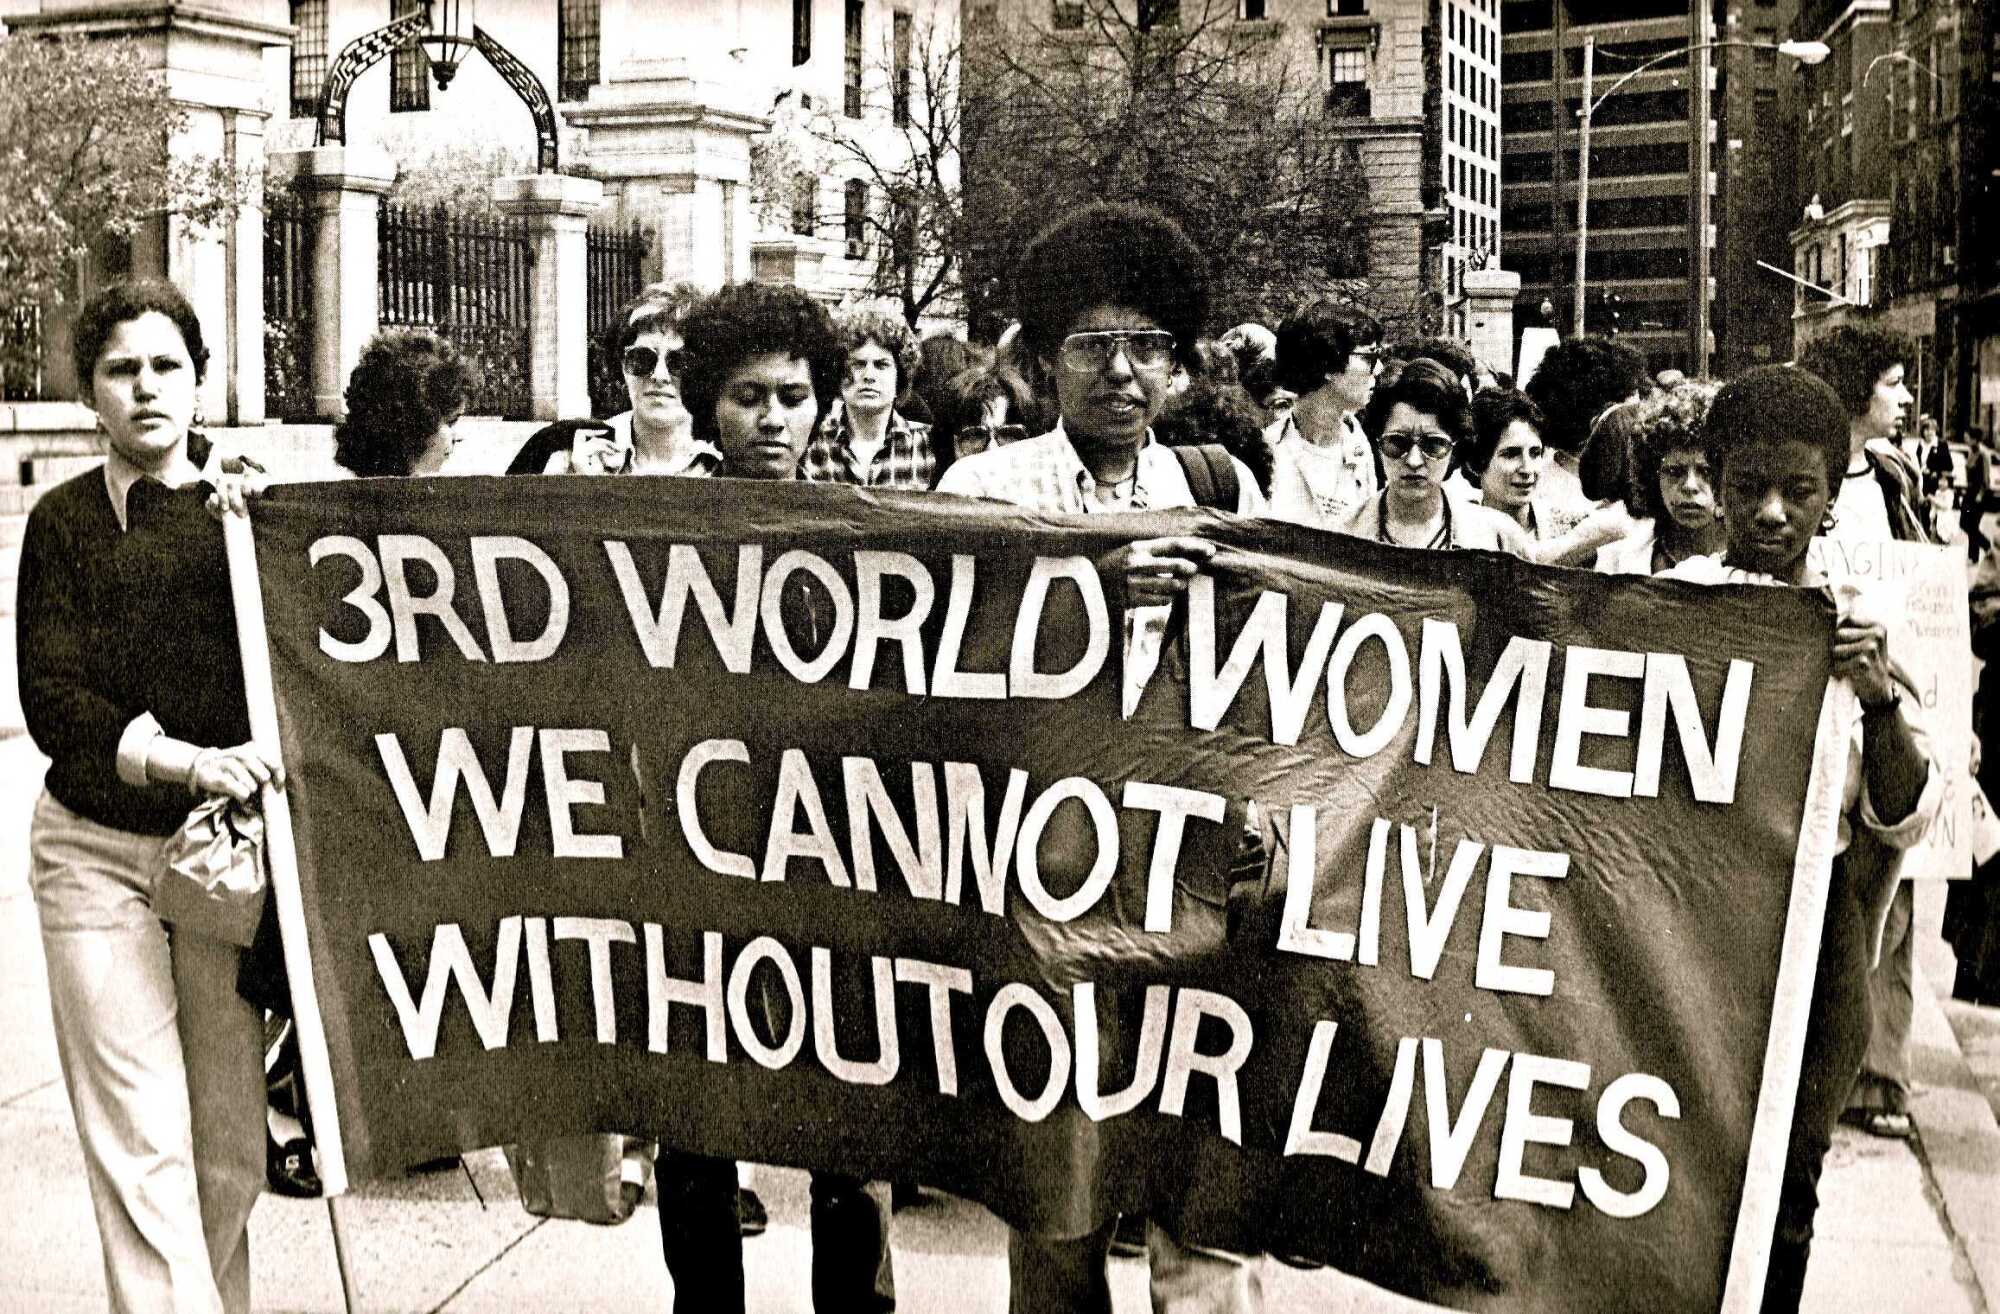 A group of women hold a protest sign in 1979.